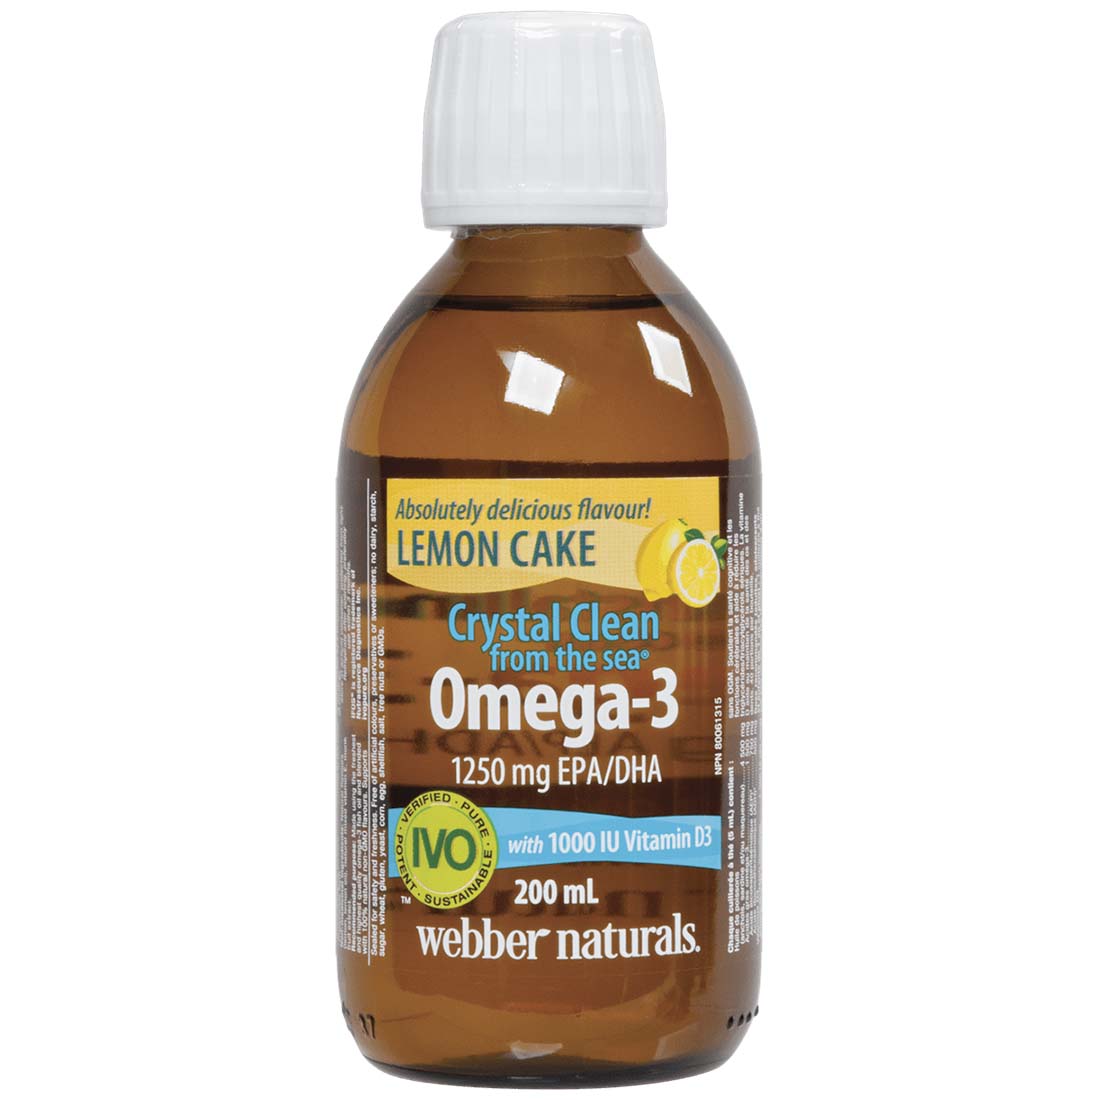 Webber Naturals Omega-3 with Vitamin D3 Fish Oil, Crystal Clean from the Sea, Lemon Cake, 200ml Liquid